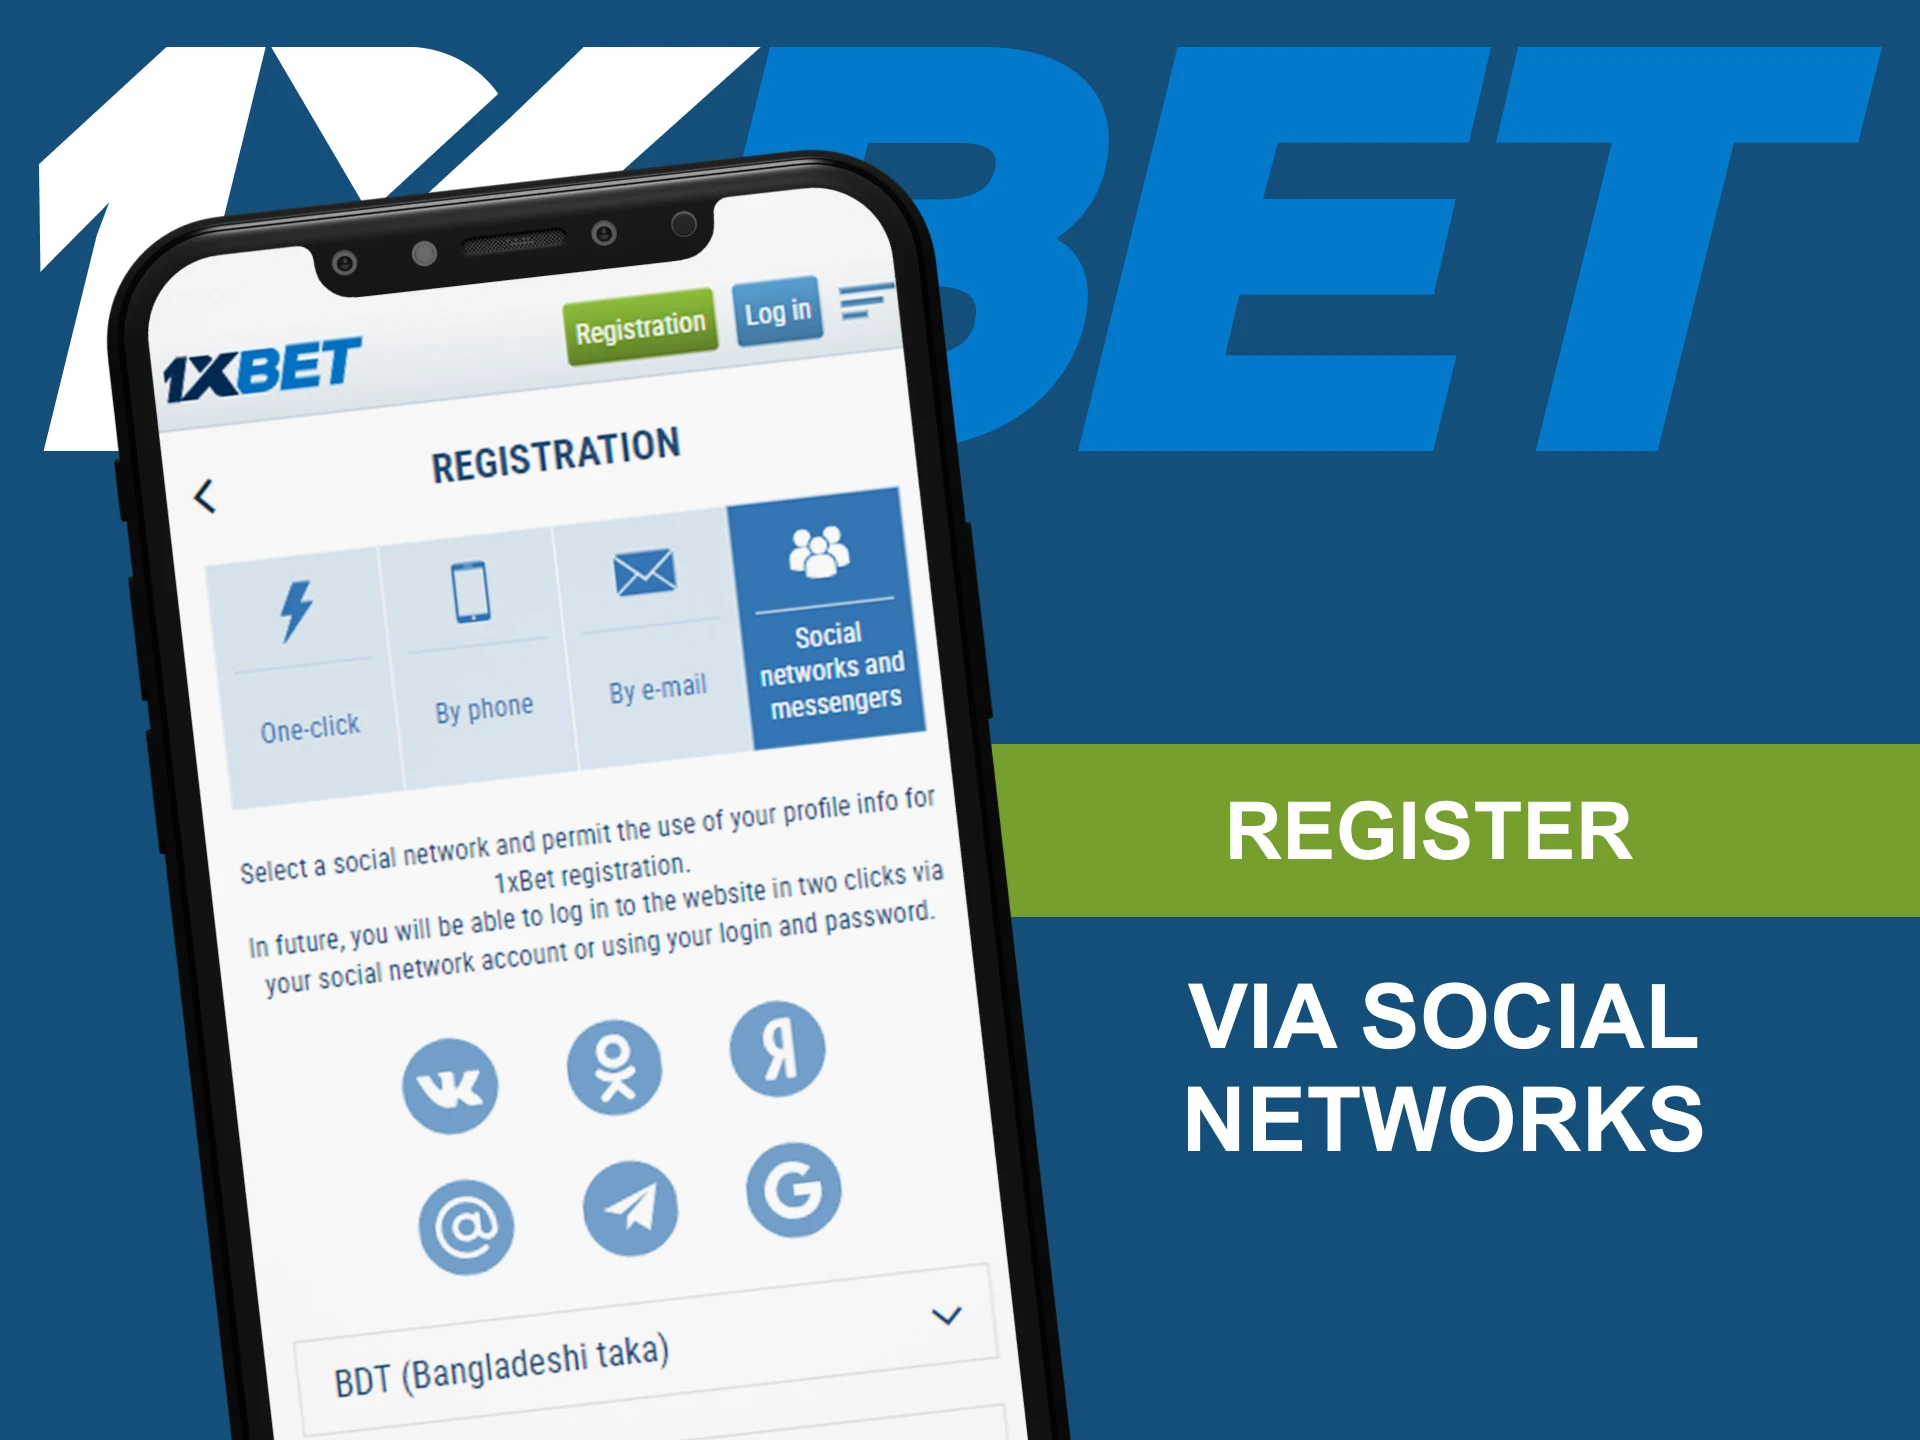 If you have an account in Social Networks, you can use it for registration at 1xBet as well.